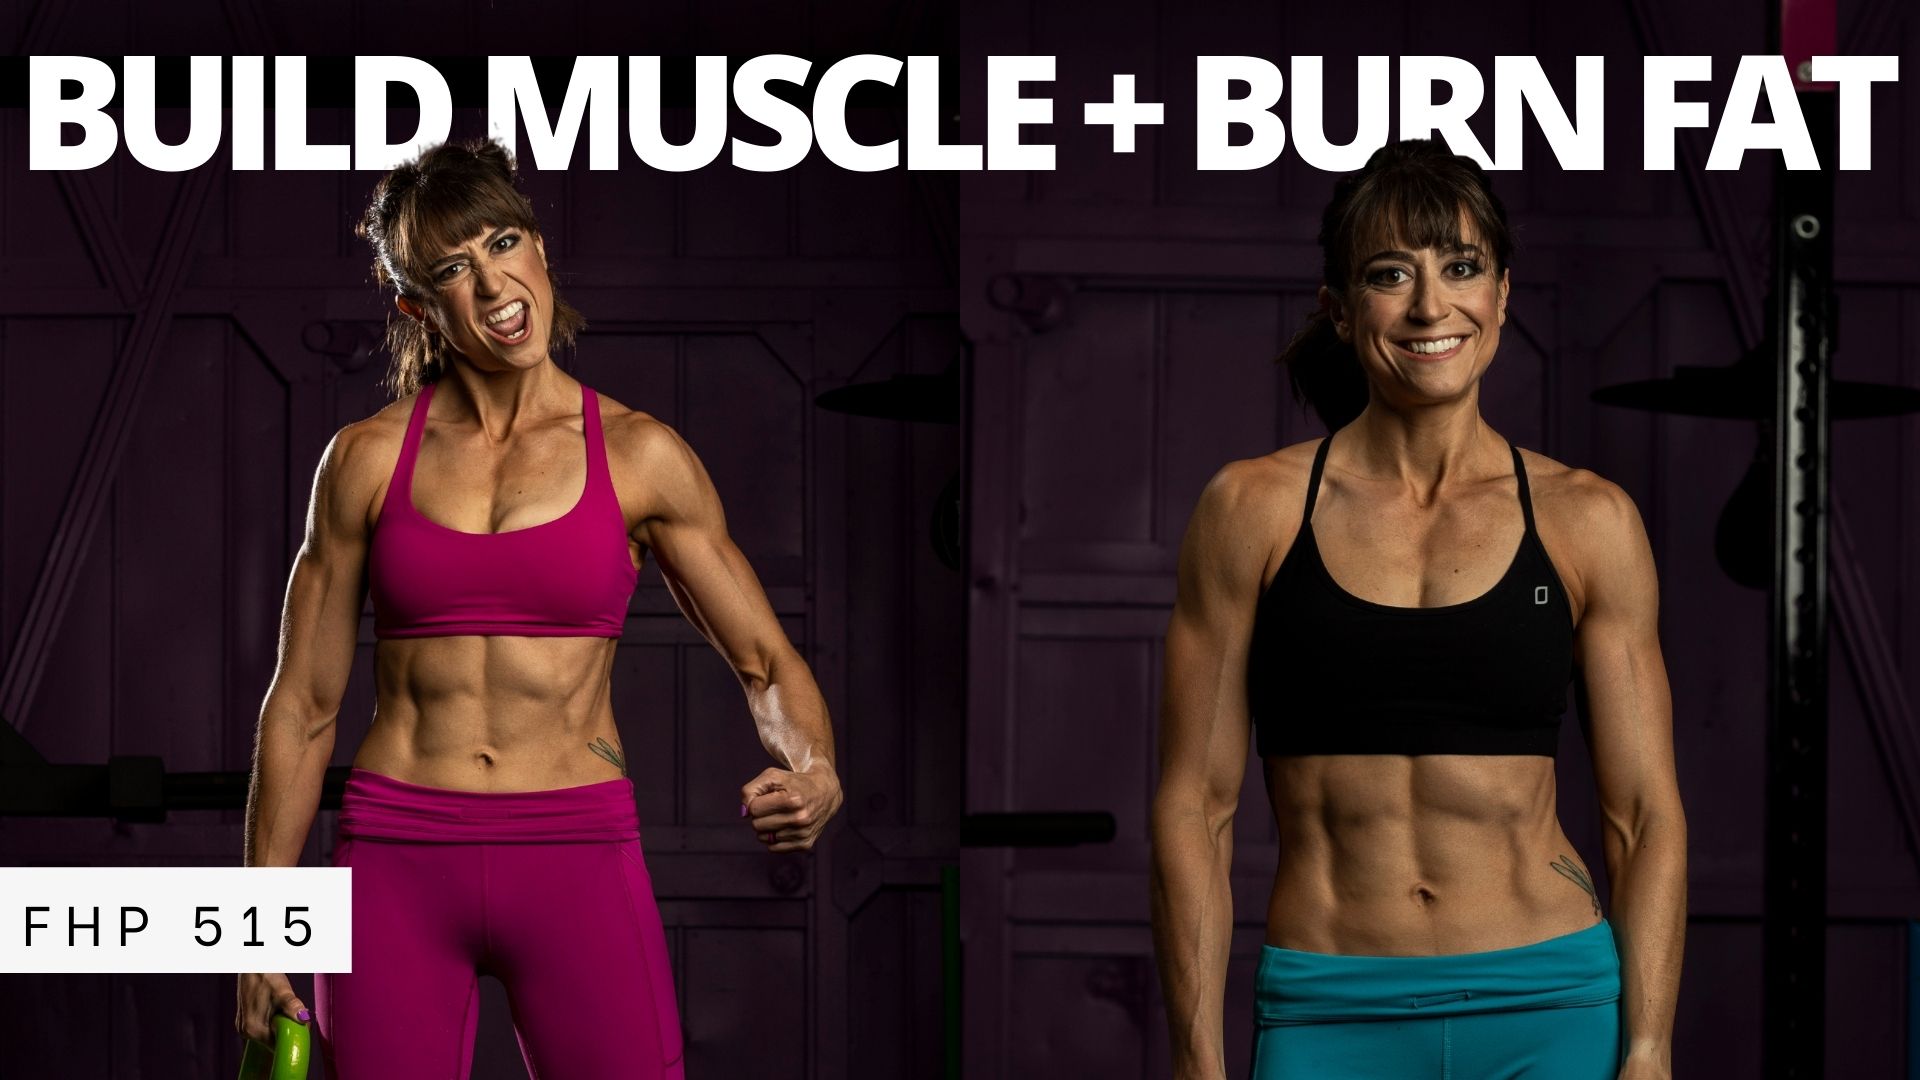 FHP 515 – How to Lose Fat AND Gain Muscle at the Same Time (Body Recomposition) With Christie Besu